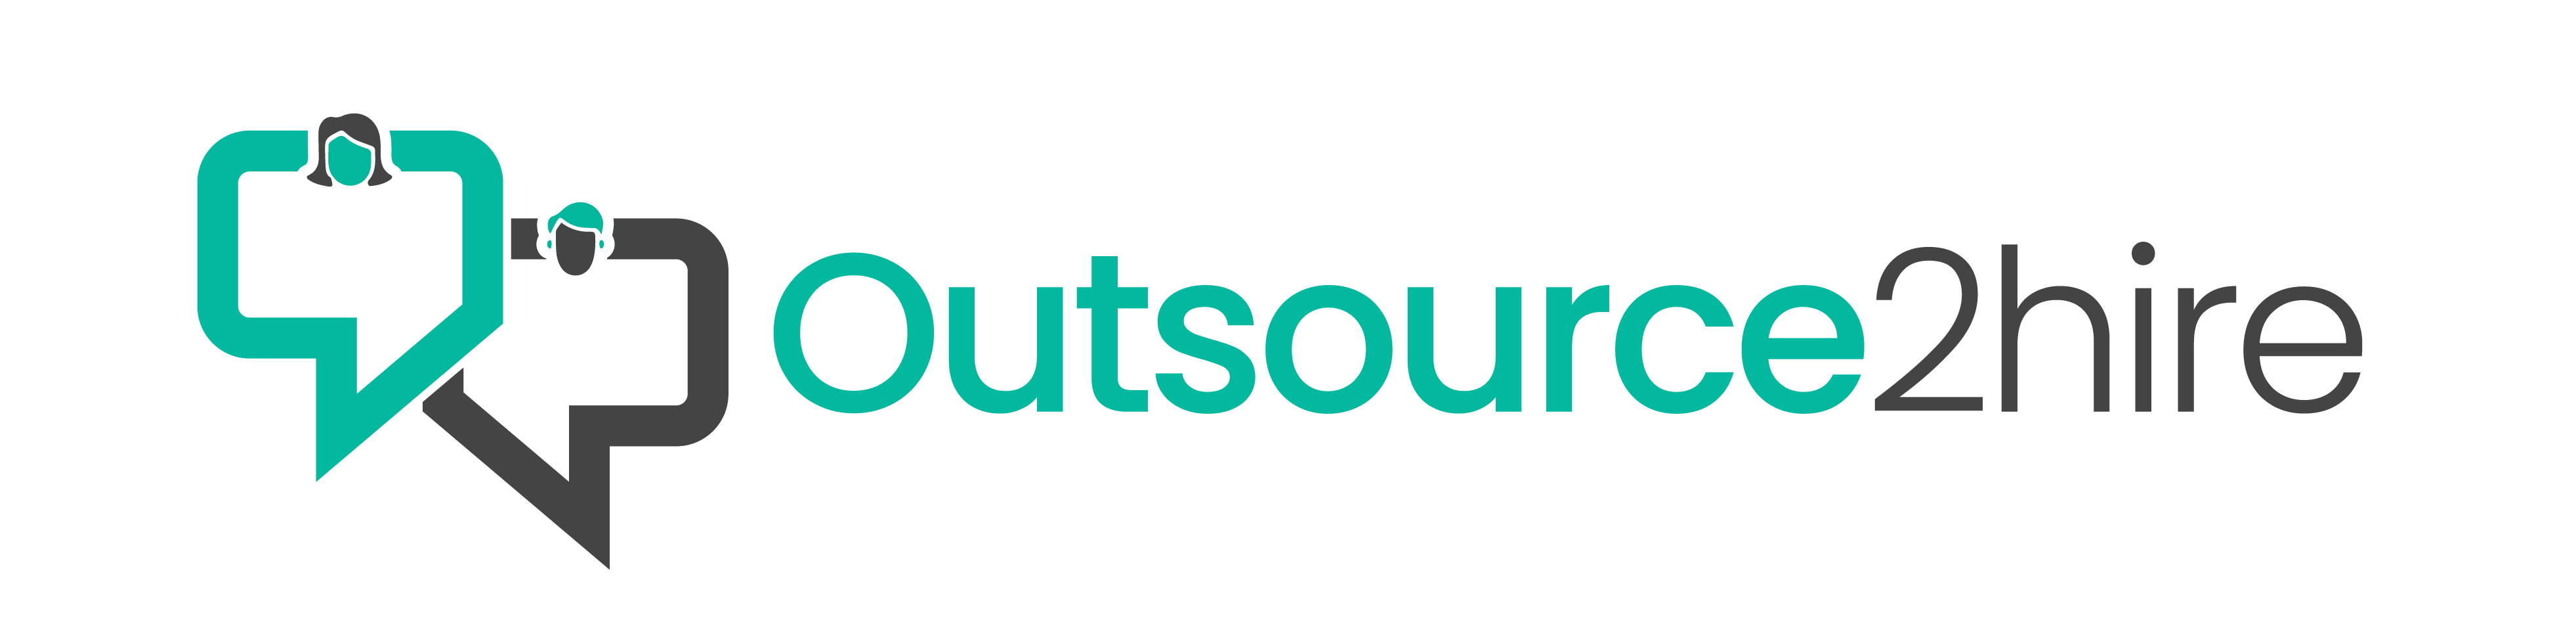 cropped-Outsource2hire-01-e1705011134647.png